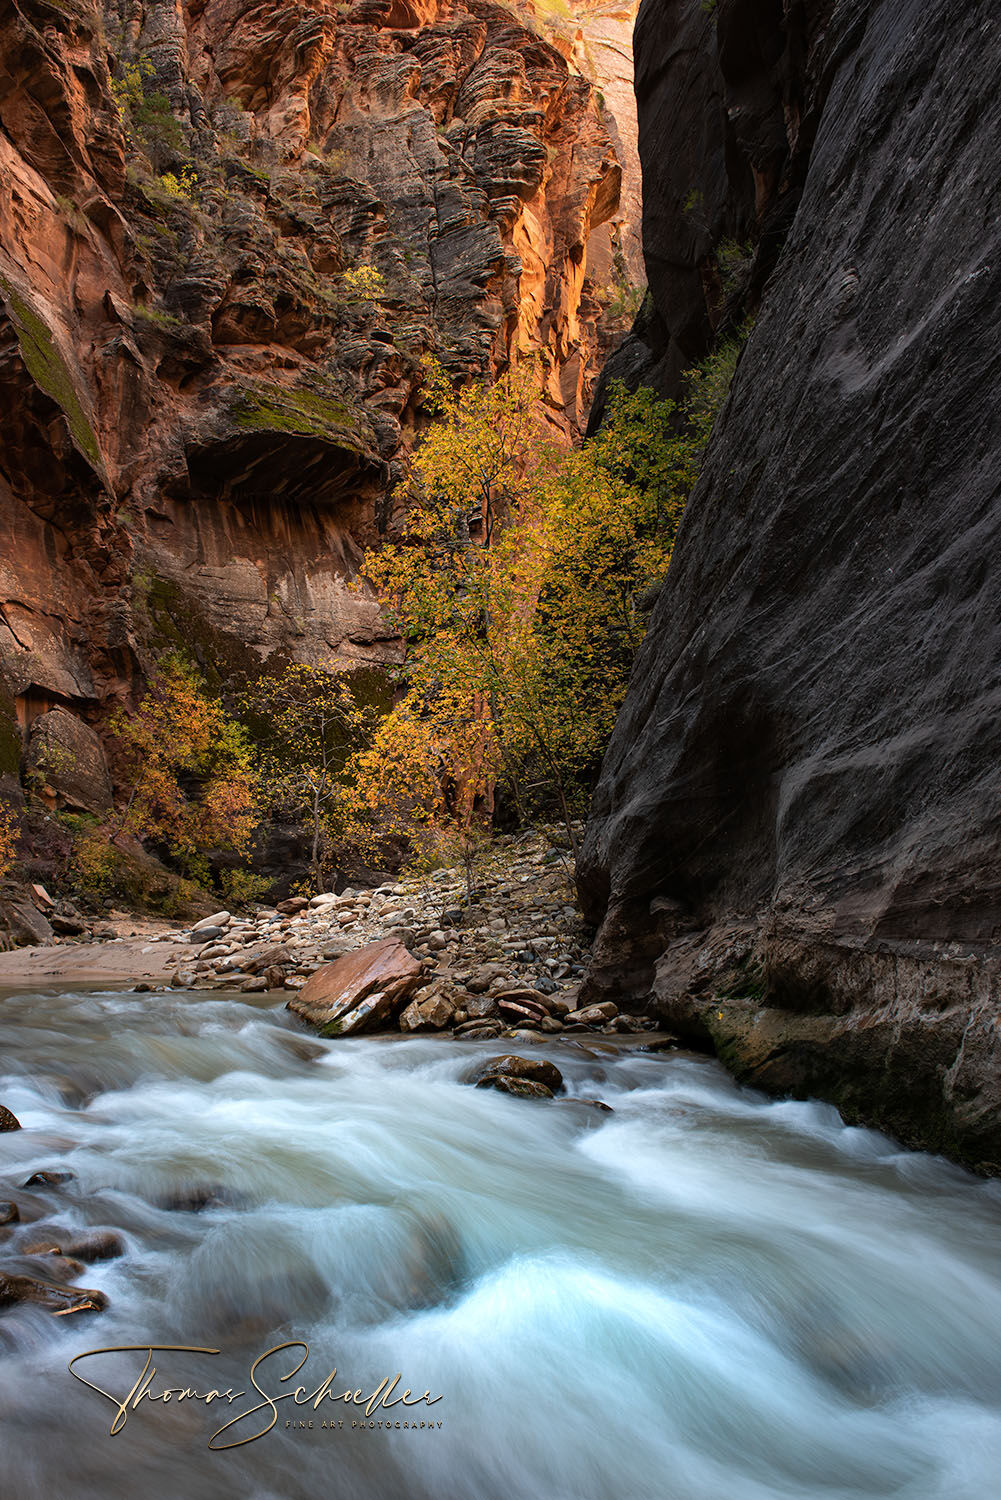 The Virgin River carves a canyon through the heart of Zion National Park | Limited Edition Zion National Park fine art photography prints for sale 